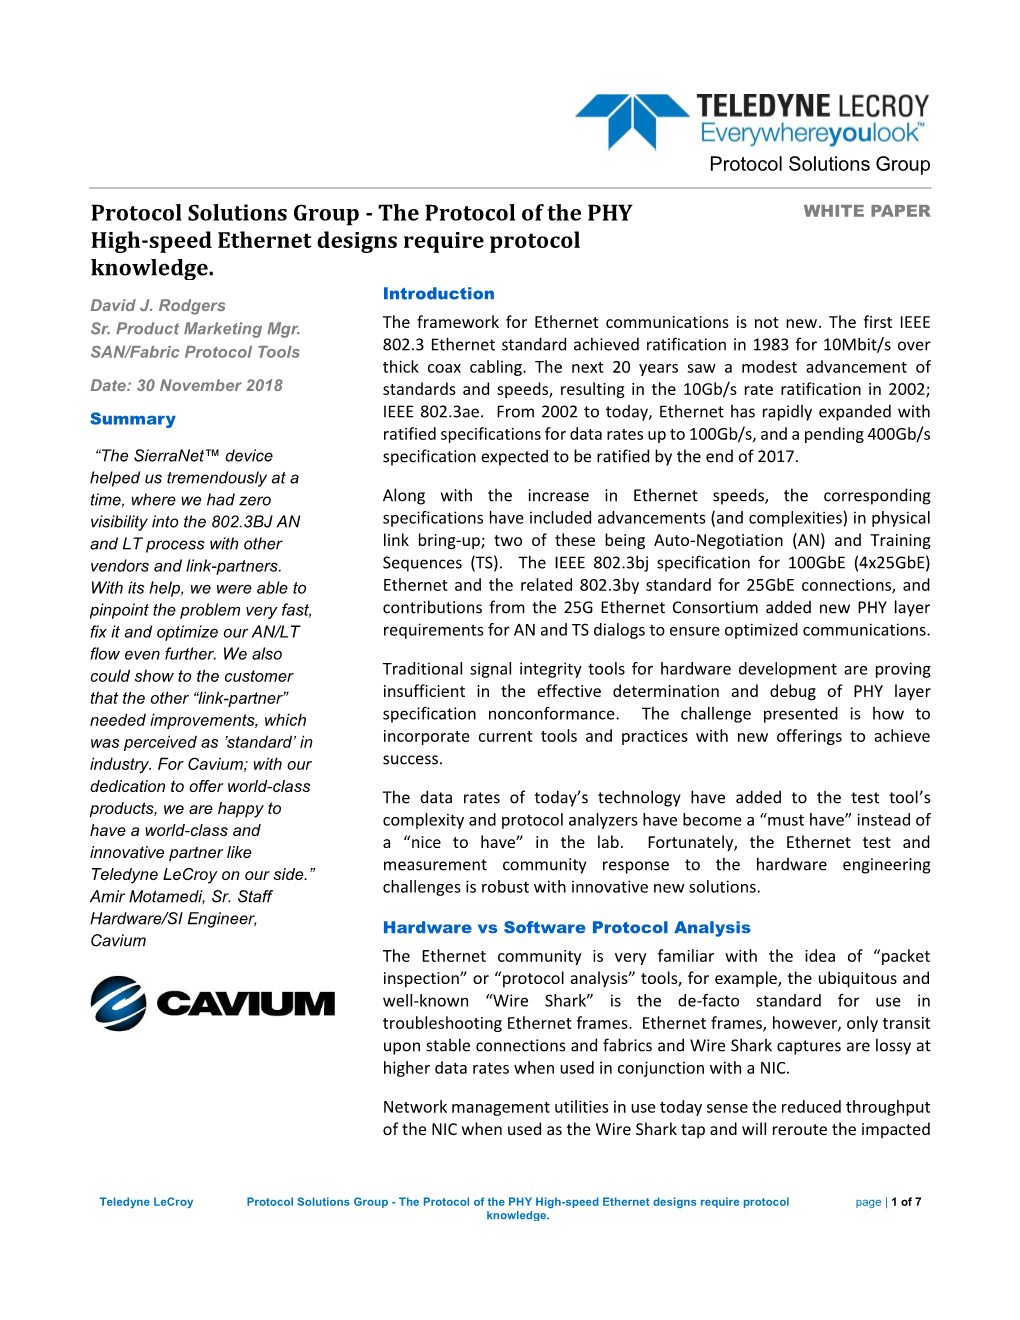 The Protocol of the PHY High-Speed Ethernet Designs Require Protocol Page | 1 of 7 Knowledge